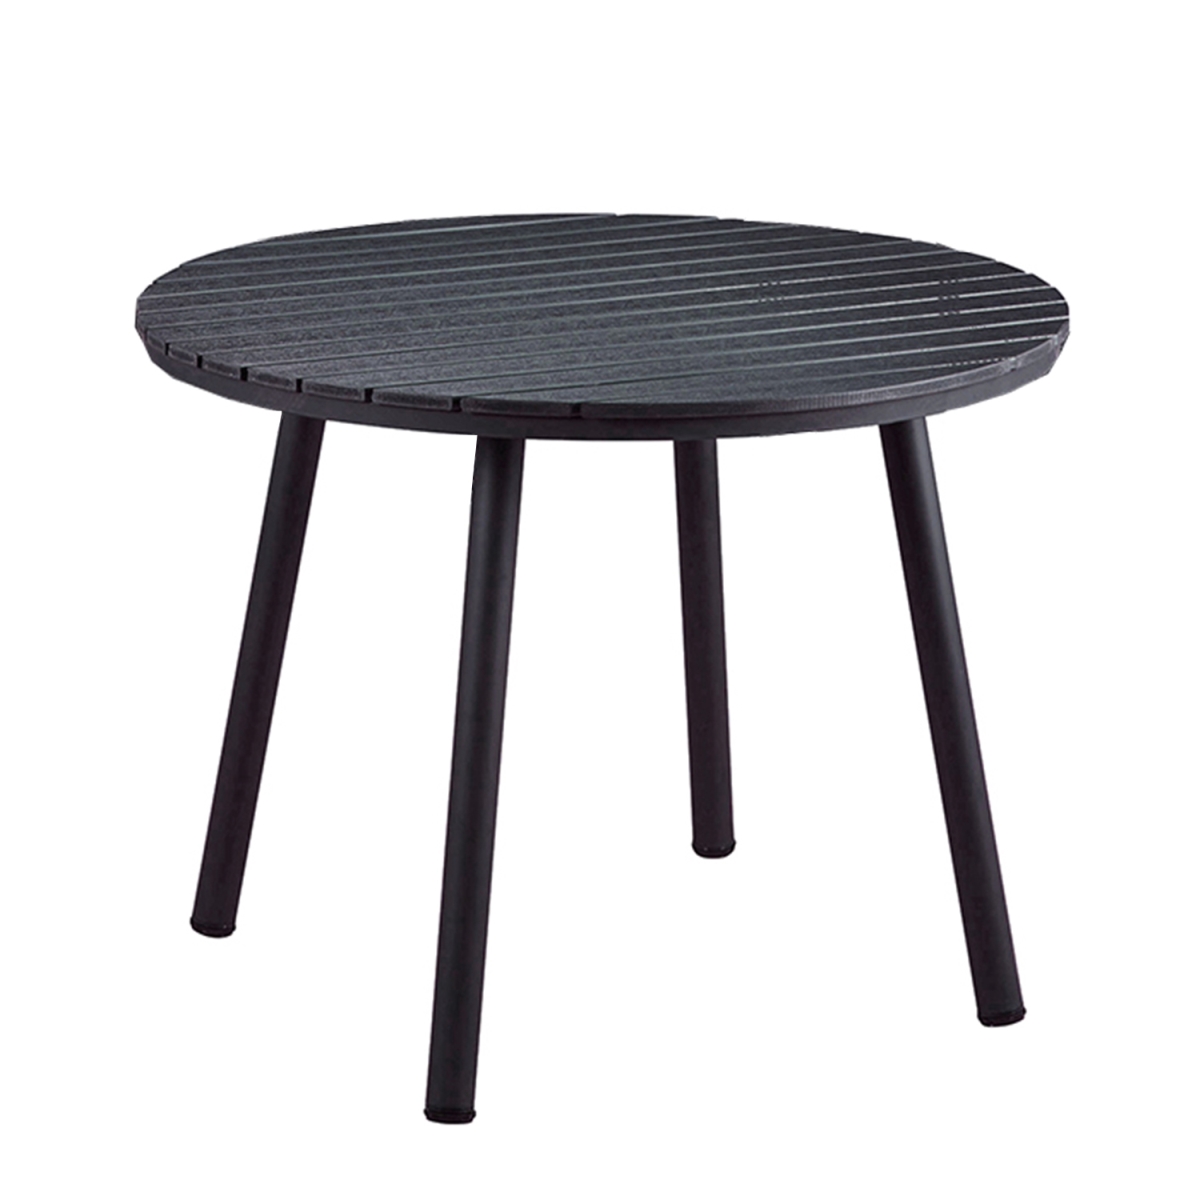 Oakland Living 910-table-bk 39 In. Indoor & Outdoor Round Modern Contemporary Faux Wood Slatted Steel Dining Table, Black